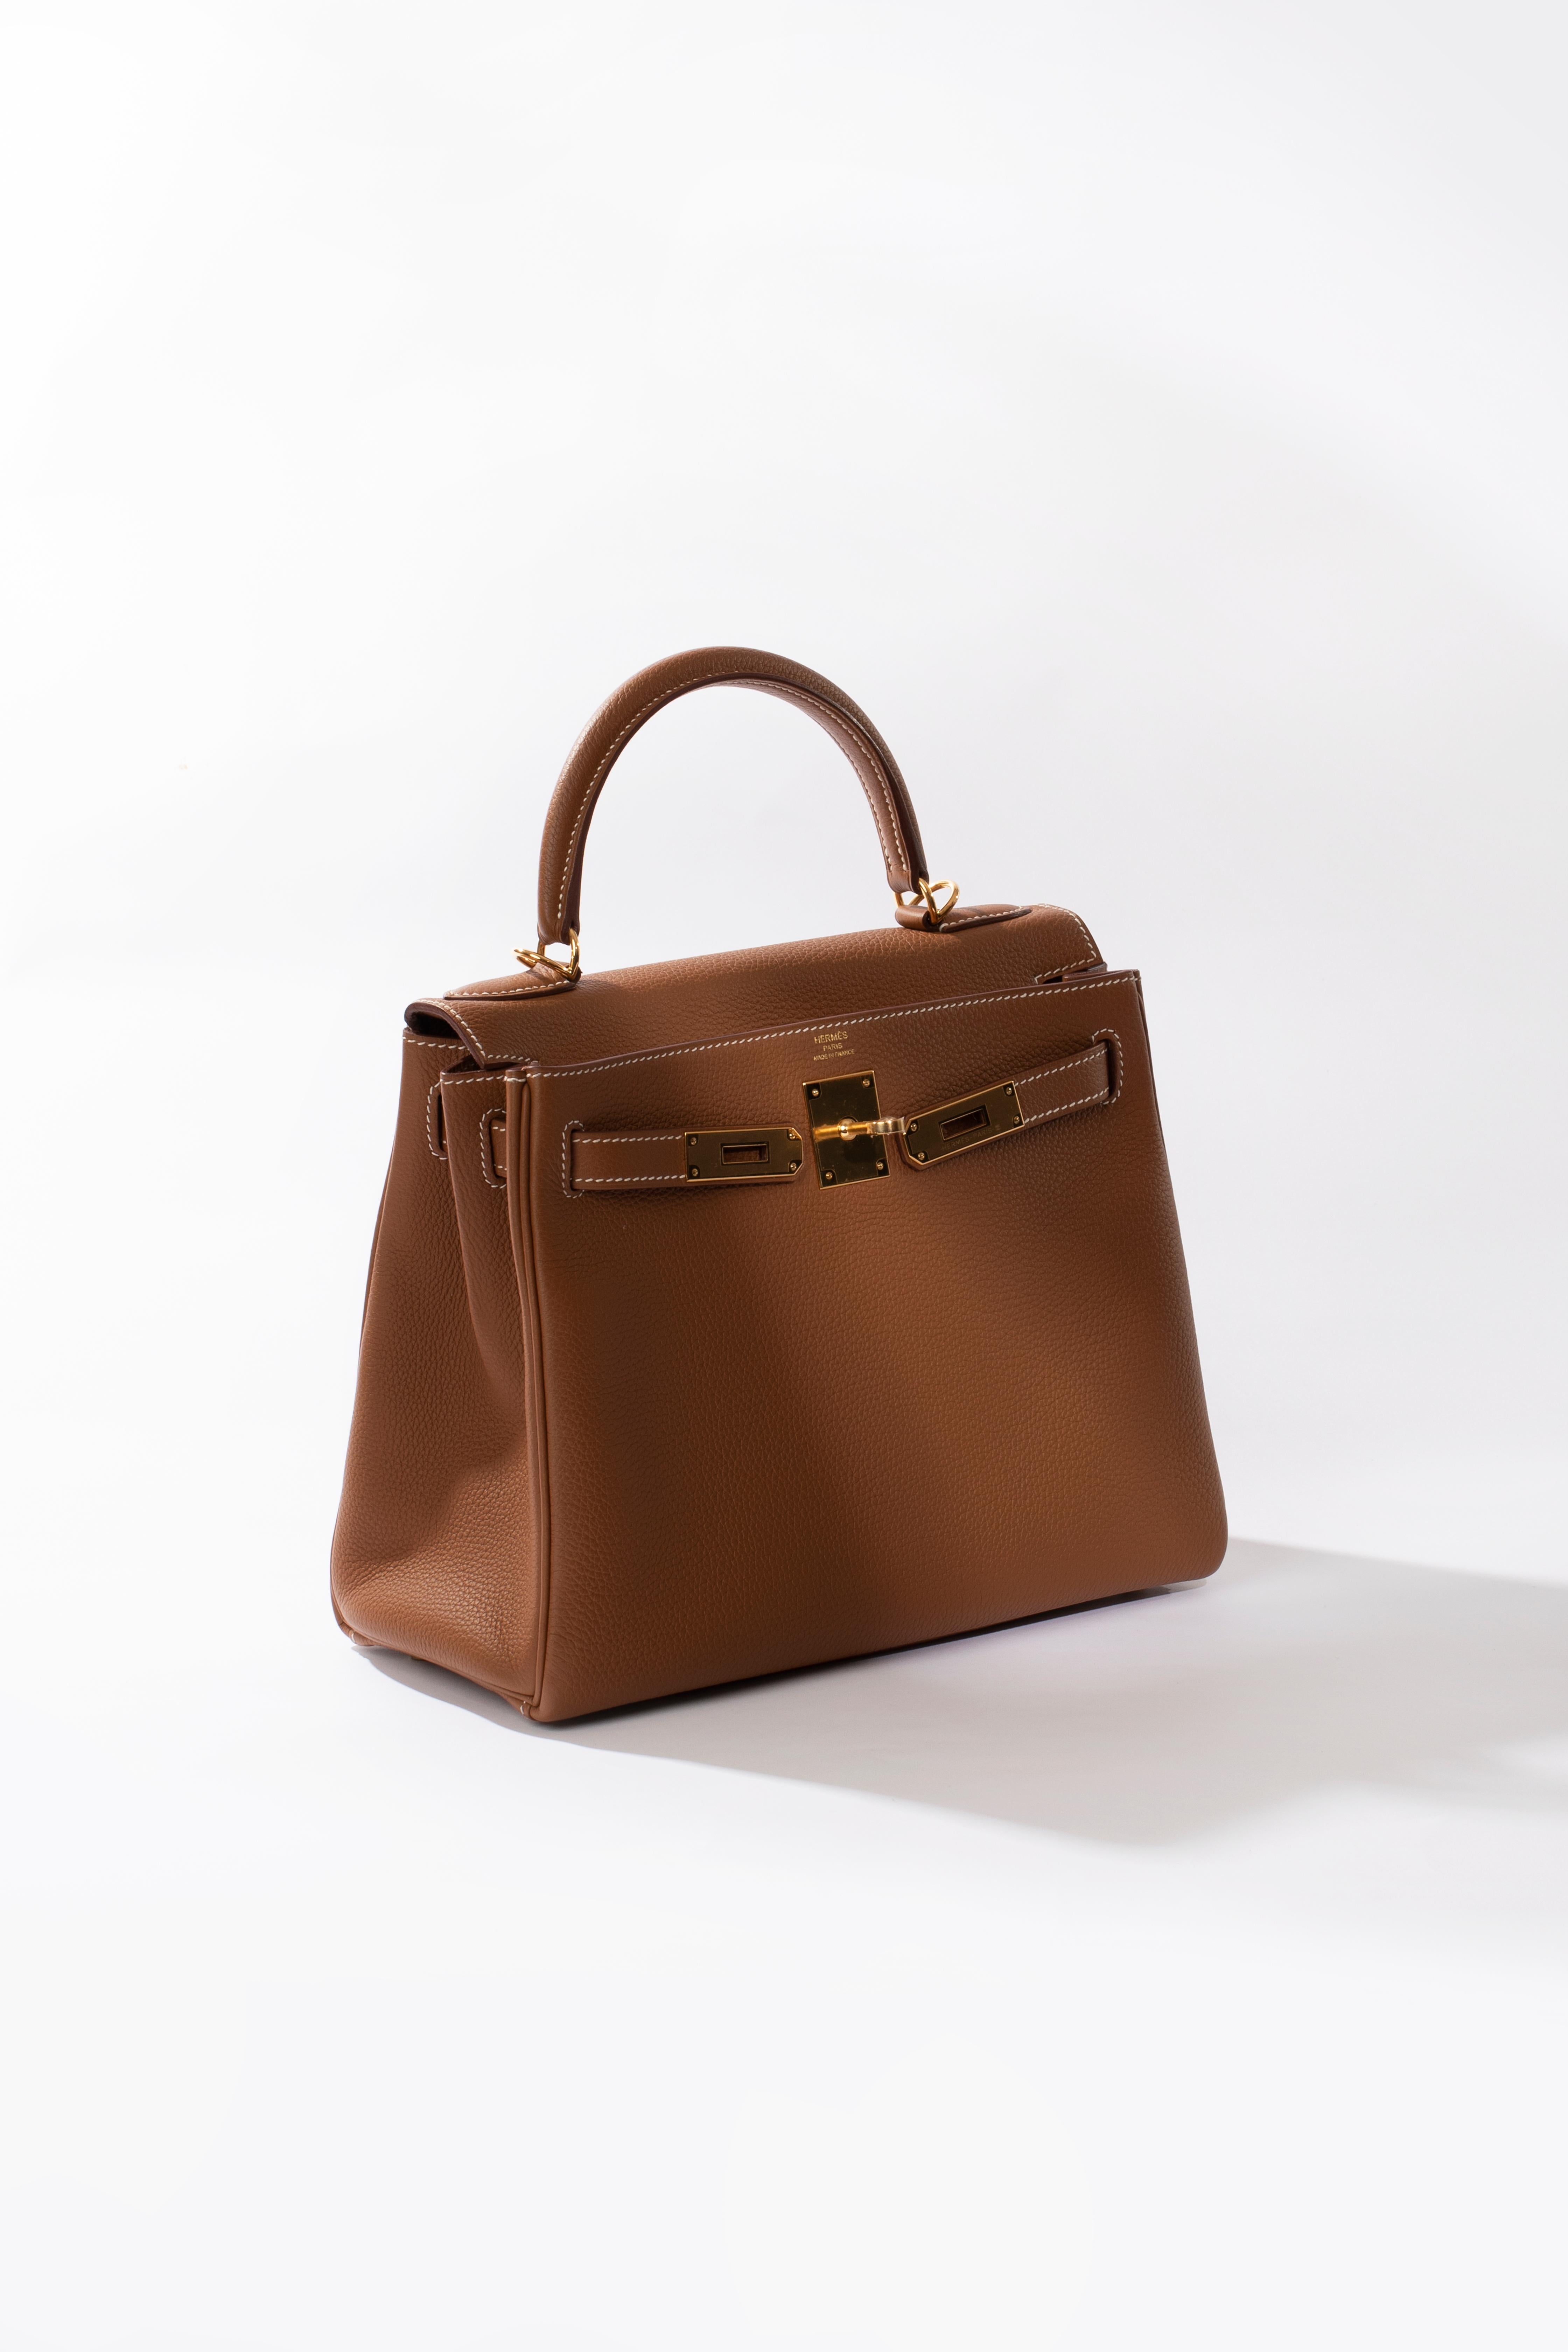 Brand: Hermès 
Style: Kelly Retourne
Size: 28cm
Color: Gold
Leather: Togo
Hardware: Gold
Stamp: 2021 Z

Condition: Pristine, never carried: The item has never been carried and is in pristine condition complete with all accessories.

Accompanied by: